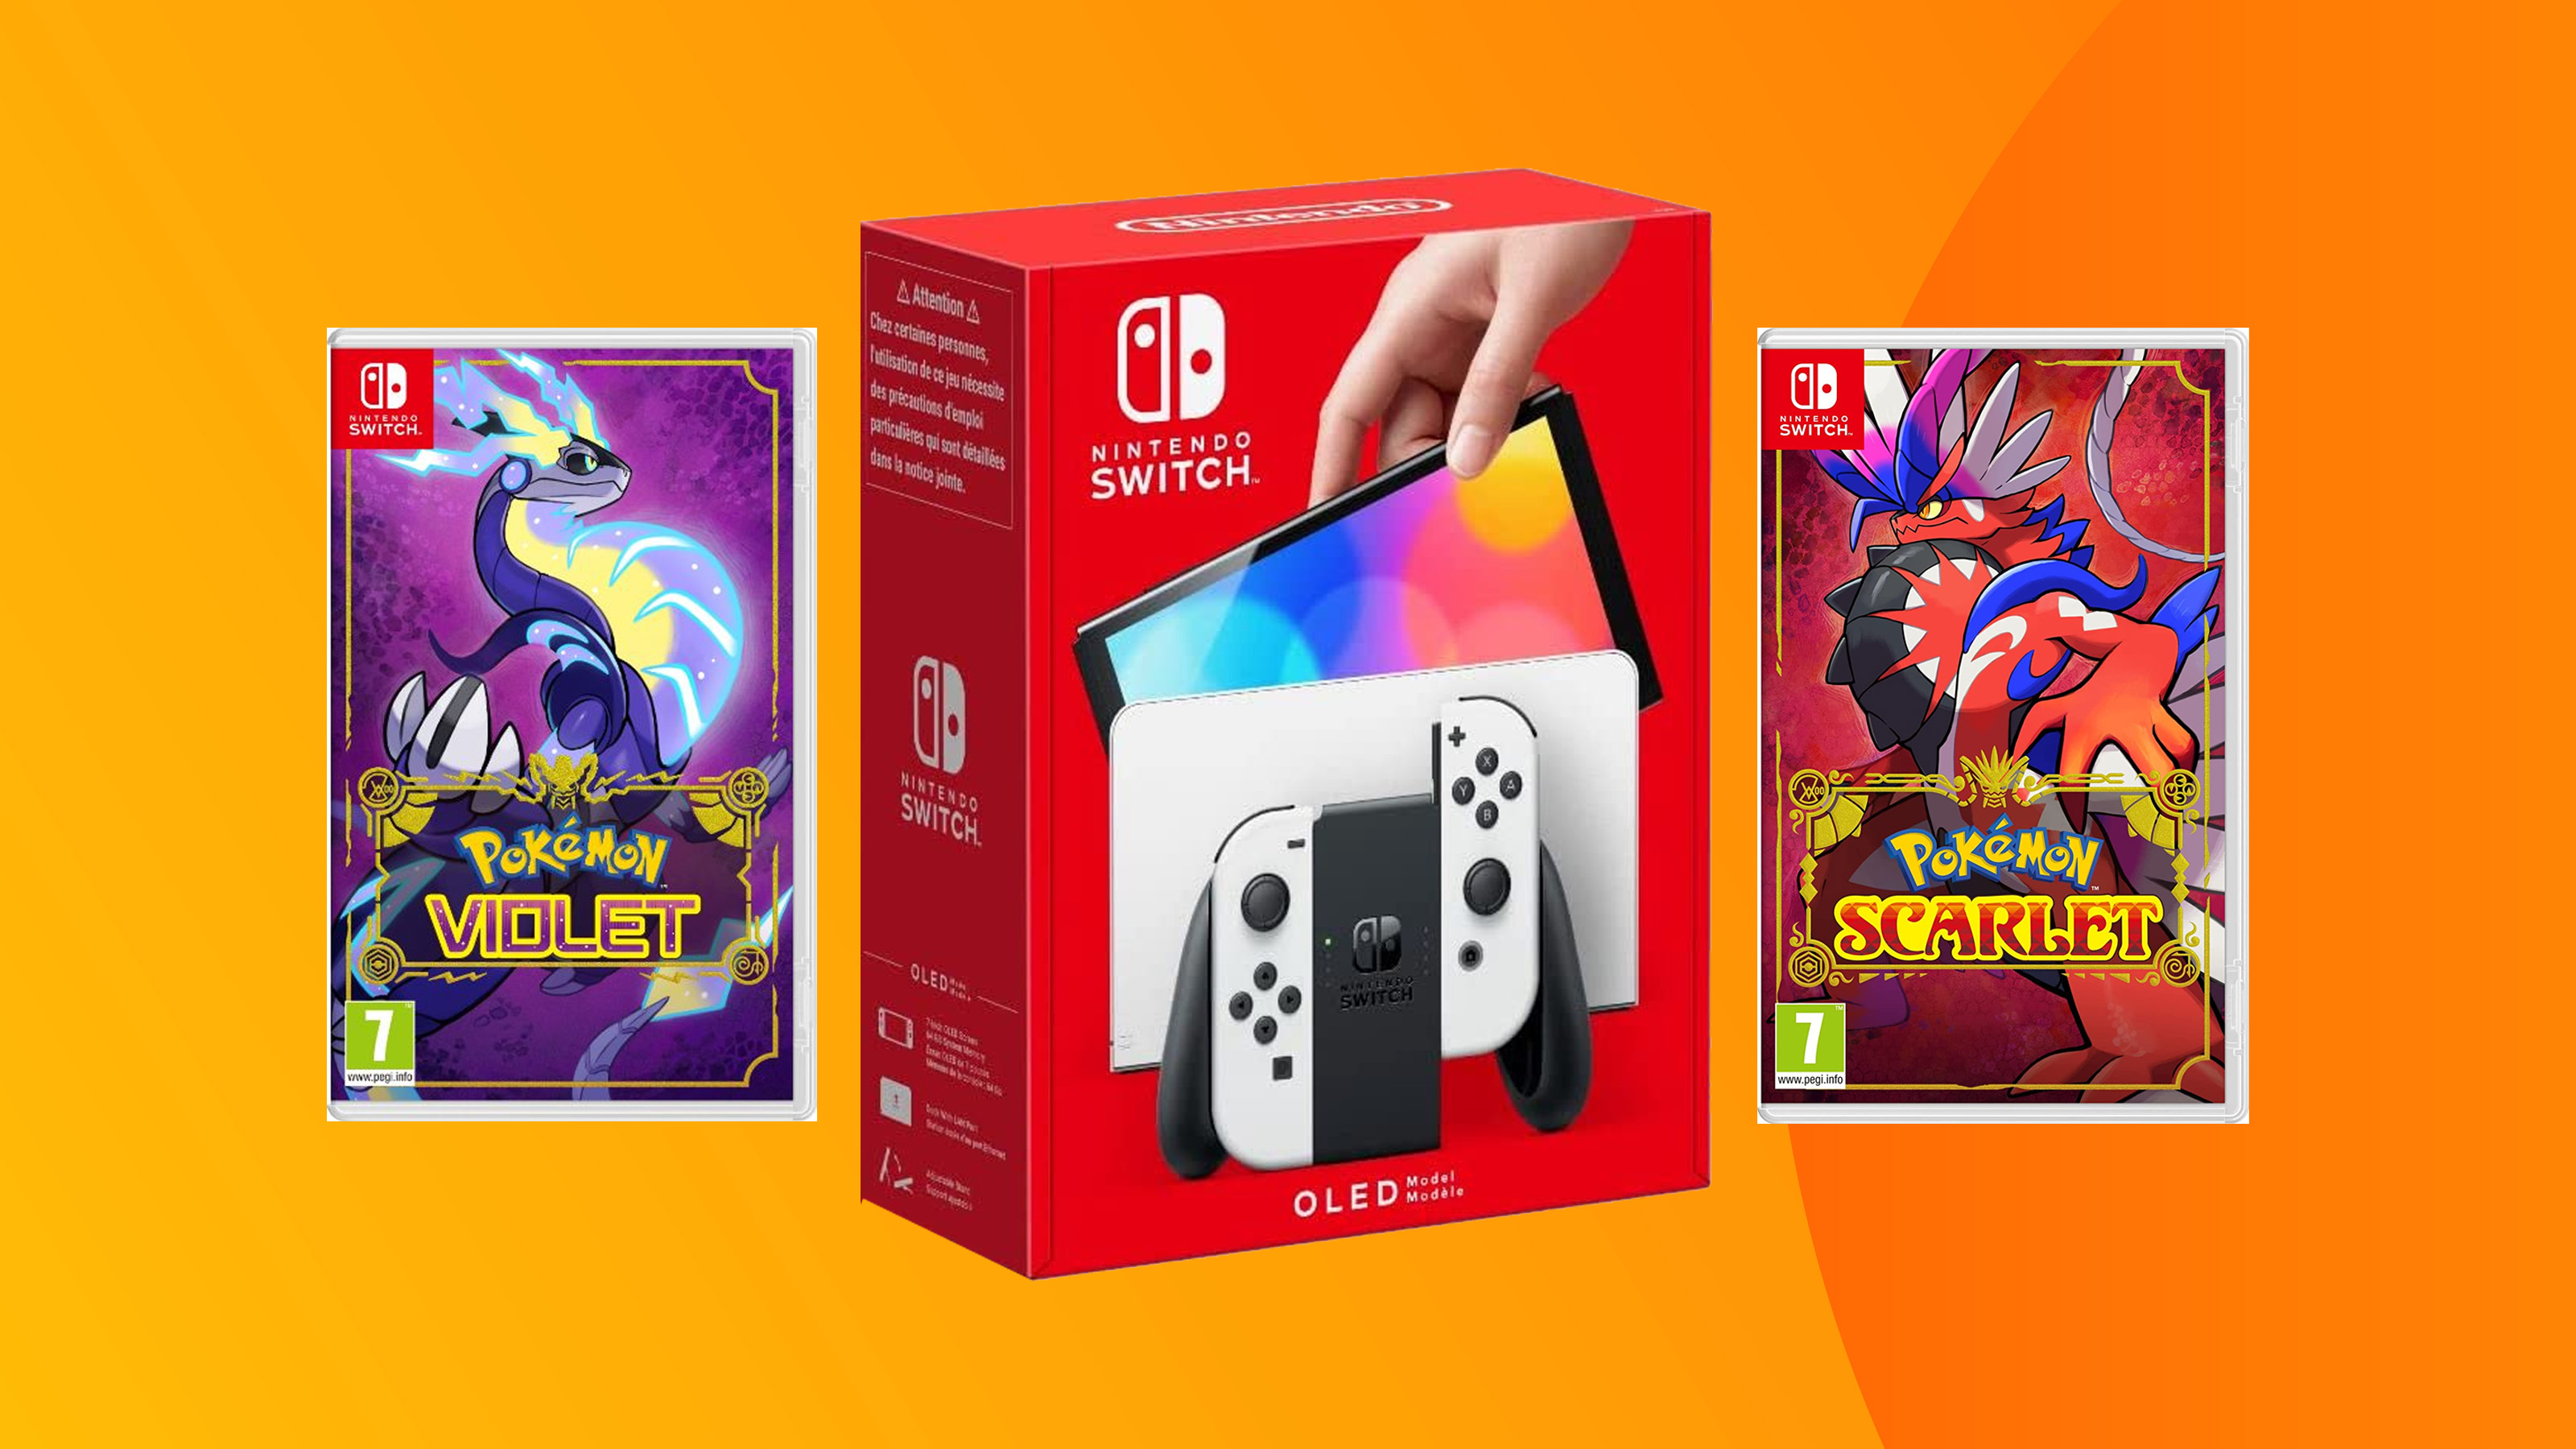 Product shot of Switch OLED console and Pokemon game in colorful background